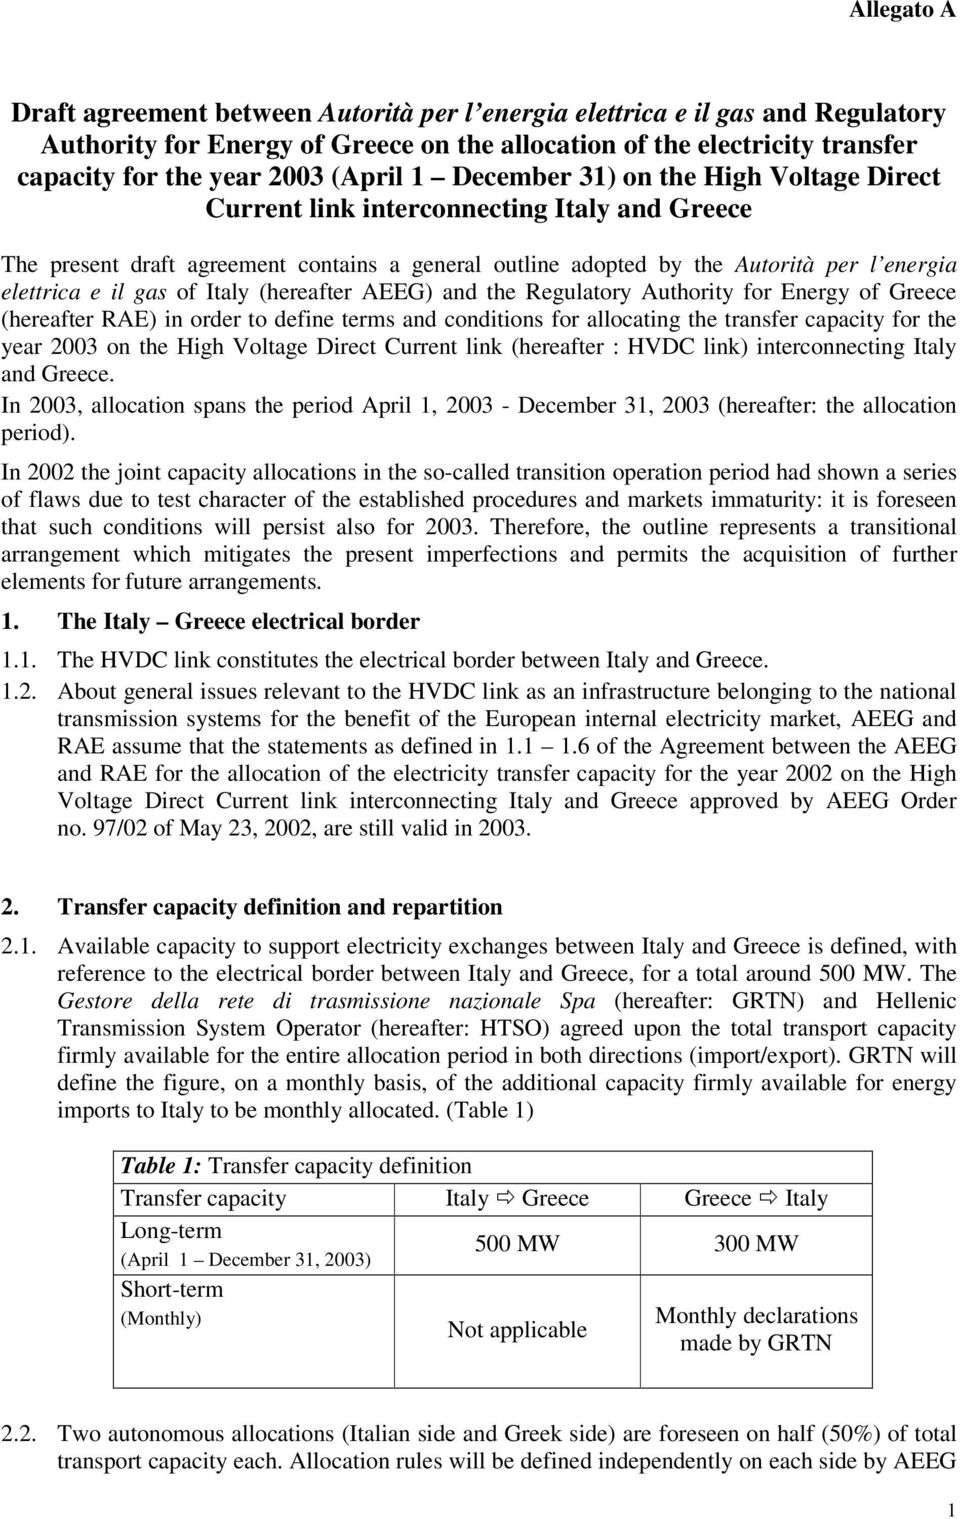 il gas of Italy (hereafter AEEG) and the Regulatory Authority for Energy of Greece (hereafter RAE) in order to define terms and conditions for allocating the transfer capacity for the year 2003 on